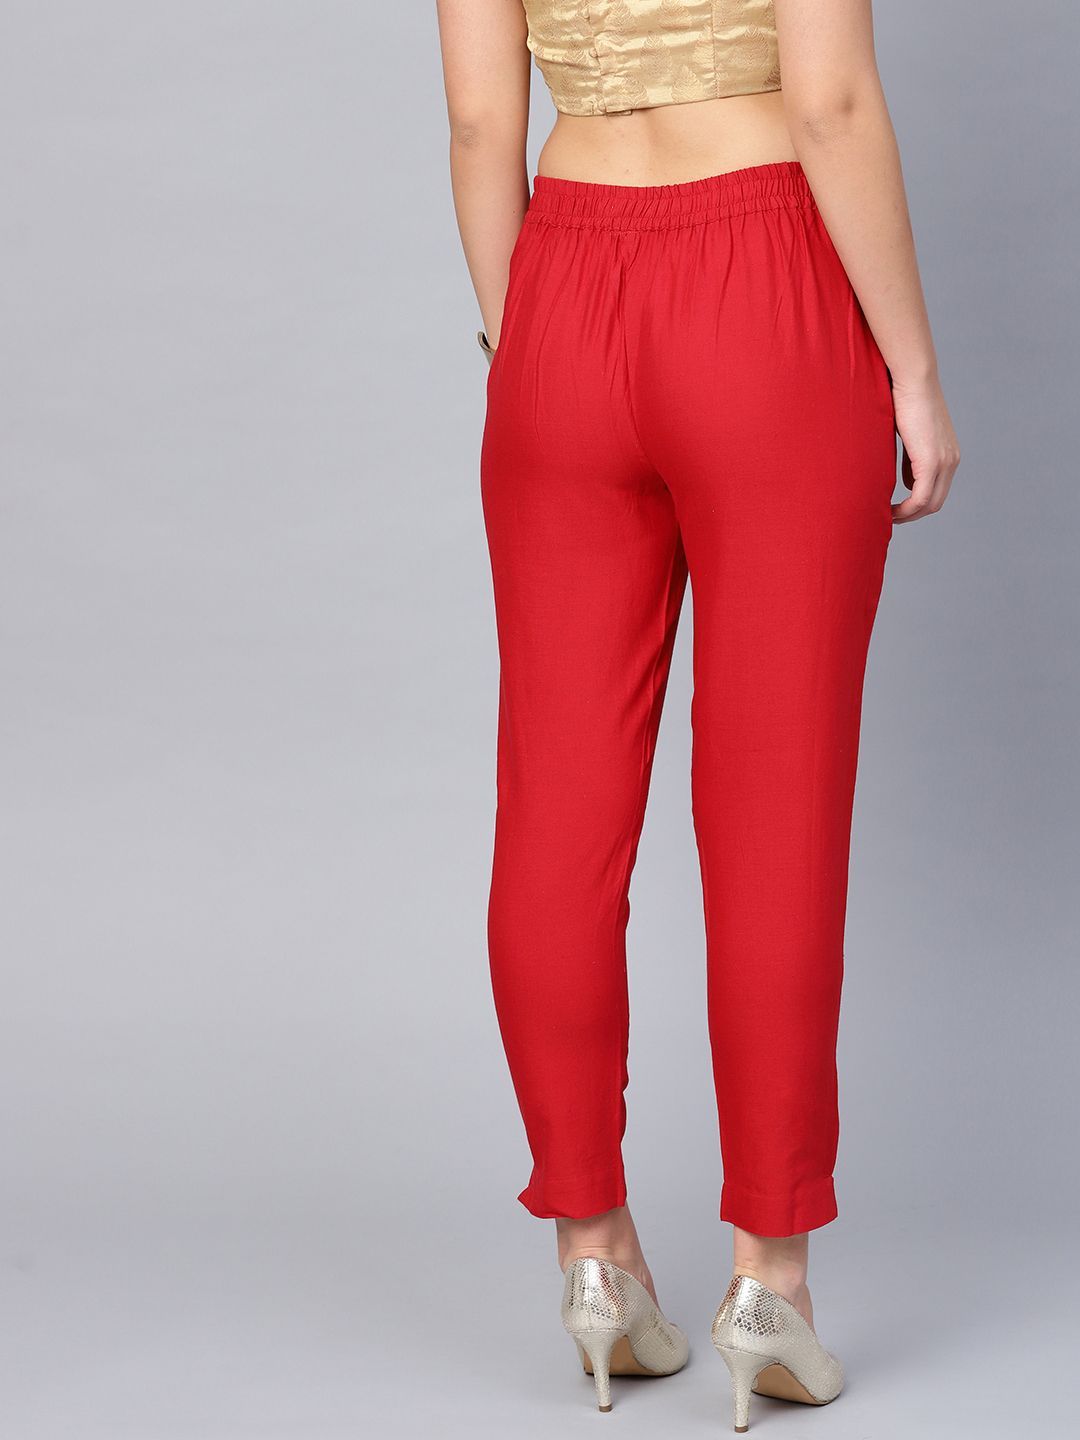 Ladies Cigarette Pants at Best Price in Mira Bhayandar - Manufacturer and  Supplier